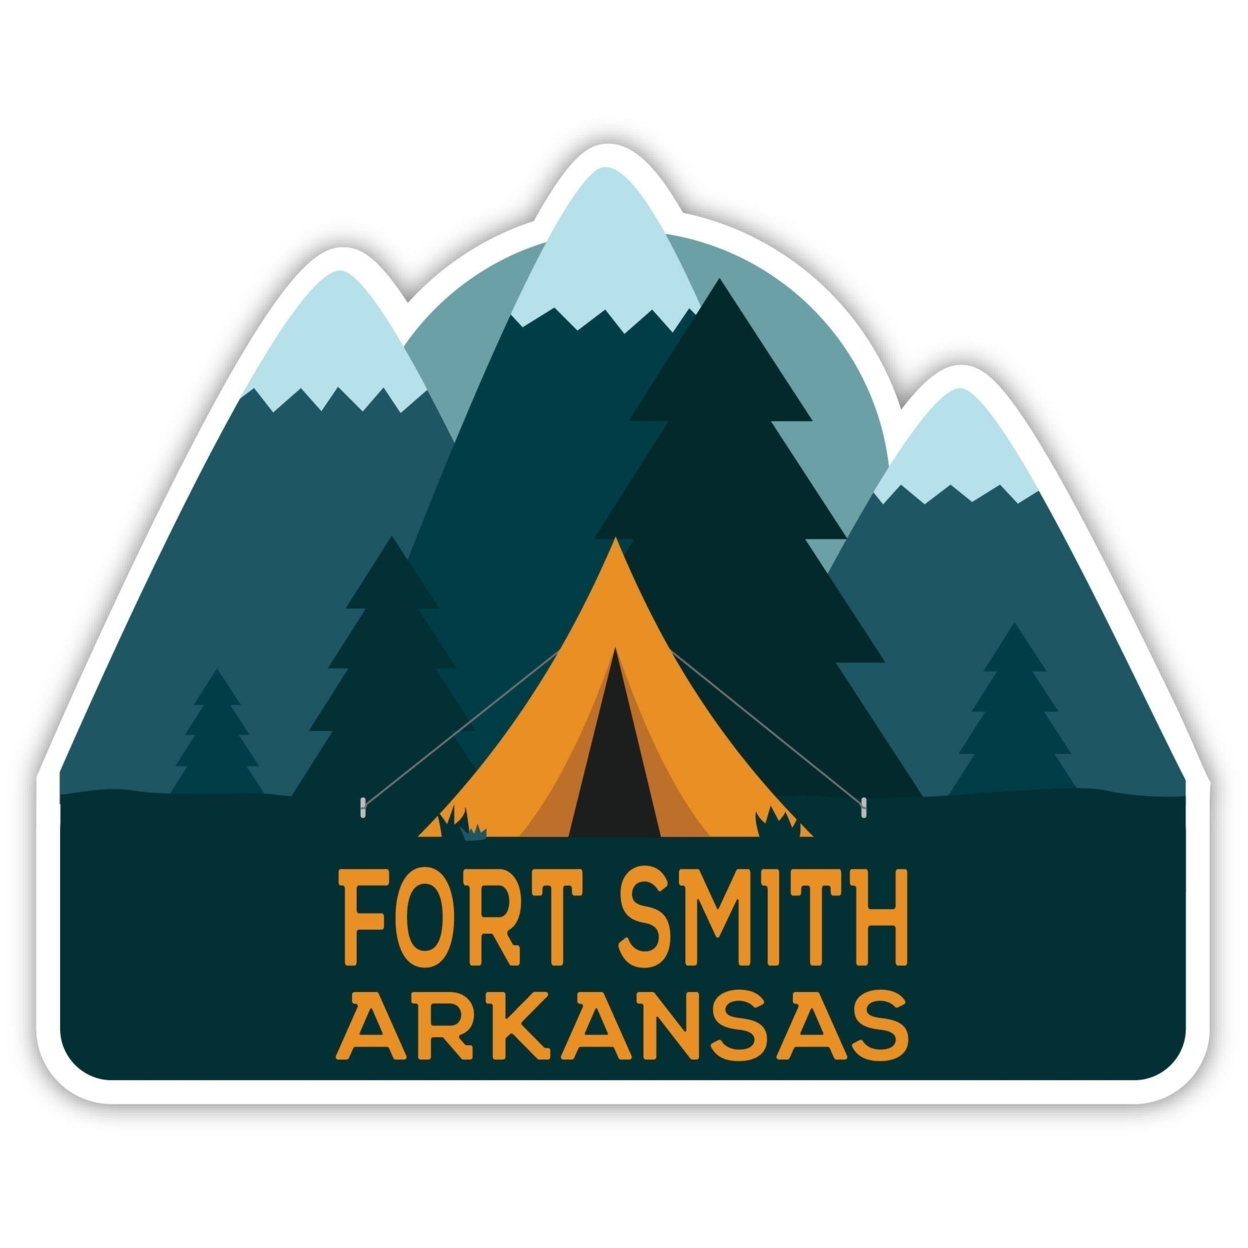 Fort Smith Arkansas Souvenir Decorative Stickers (Choose Theme And Size) - 4-Pack, 12-Inch, Tent